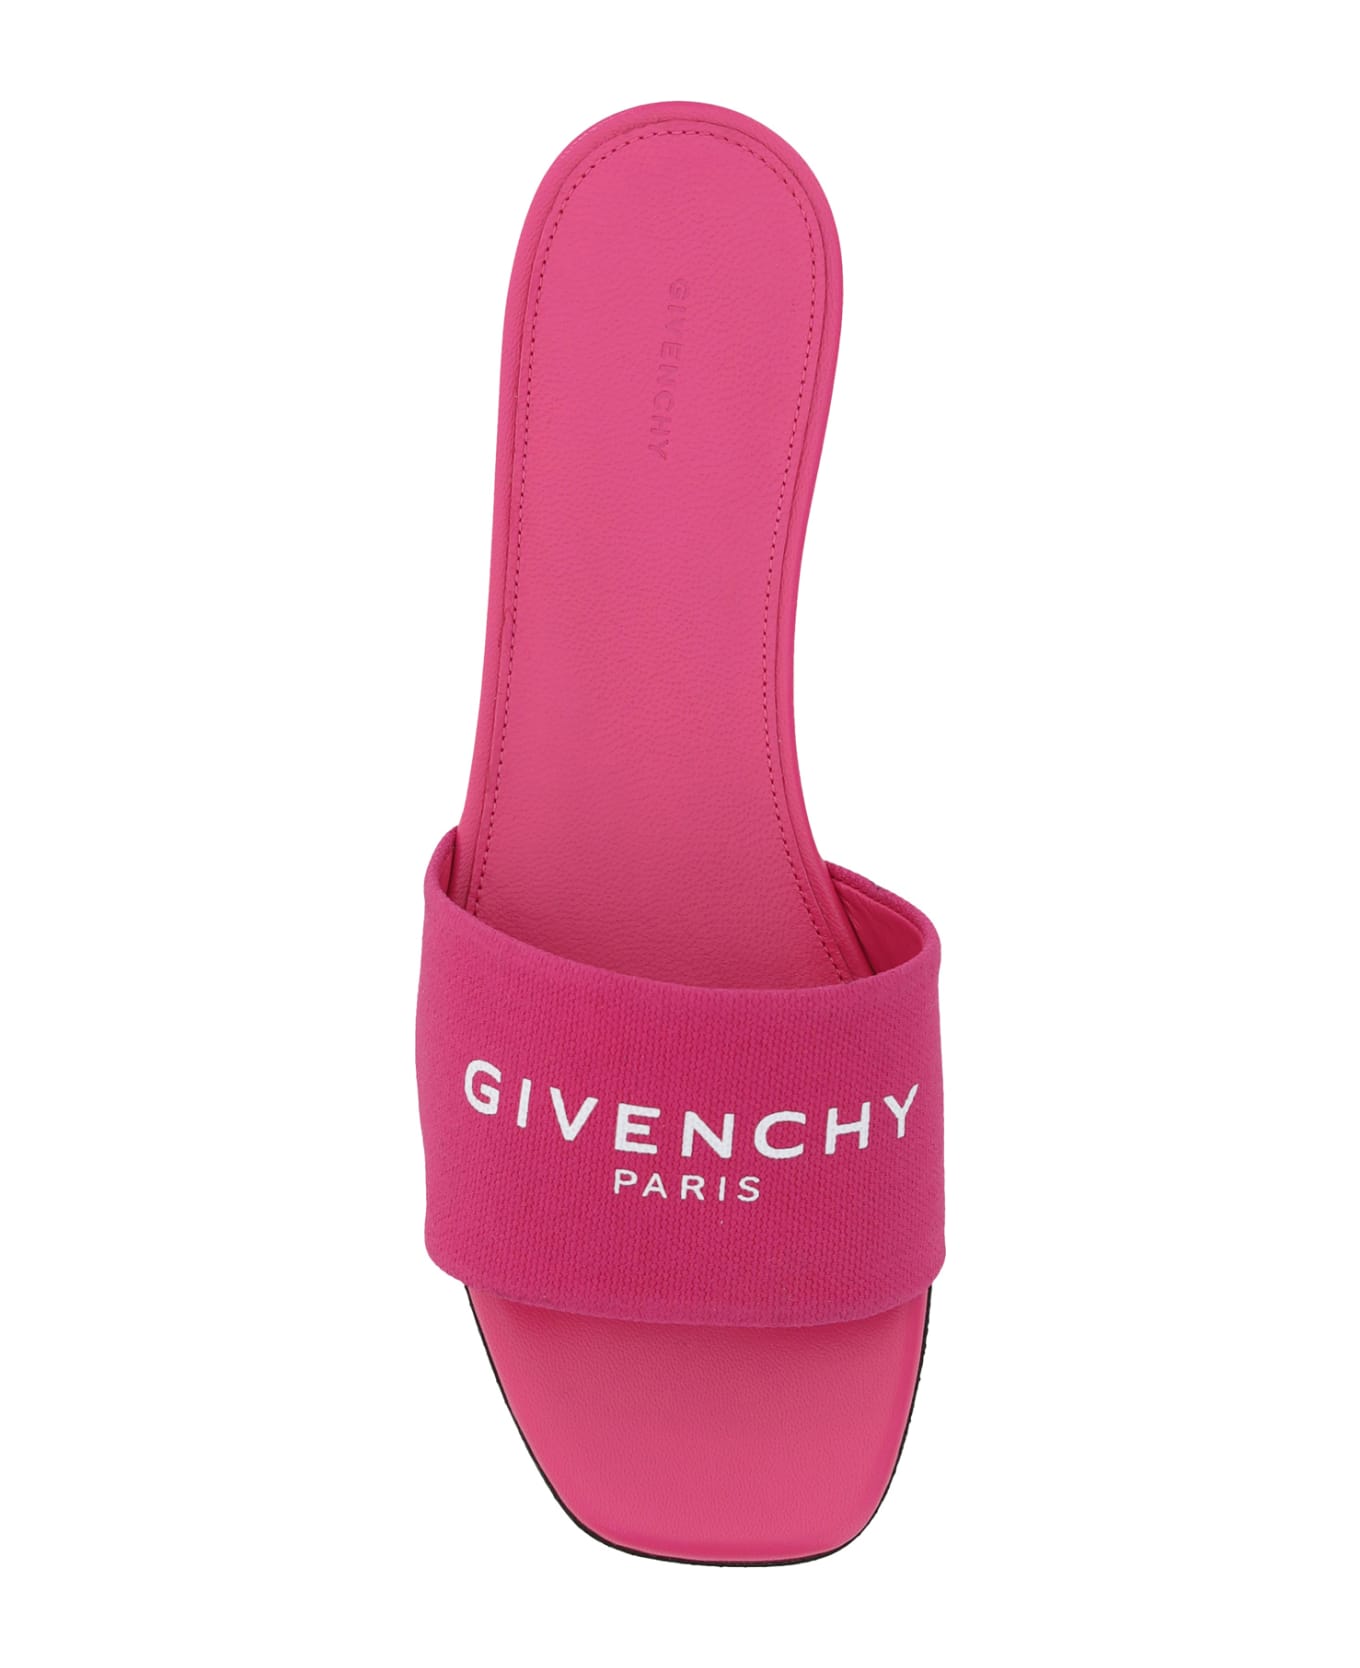 Givenchy 4g Flat Sandals - Neon Pink